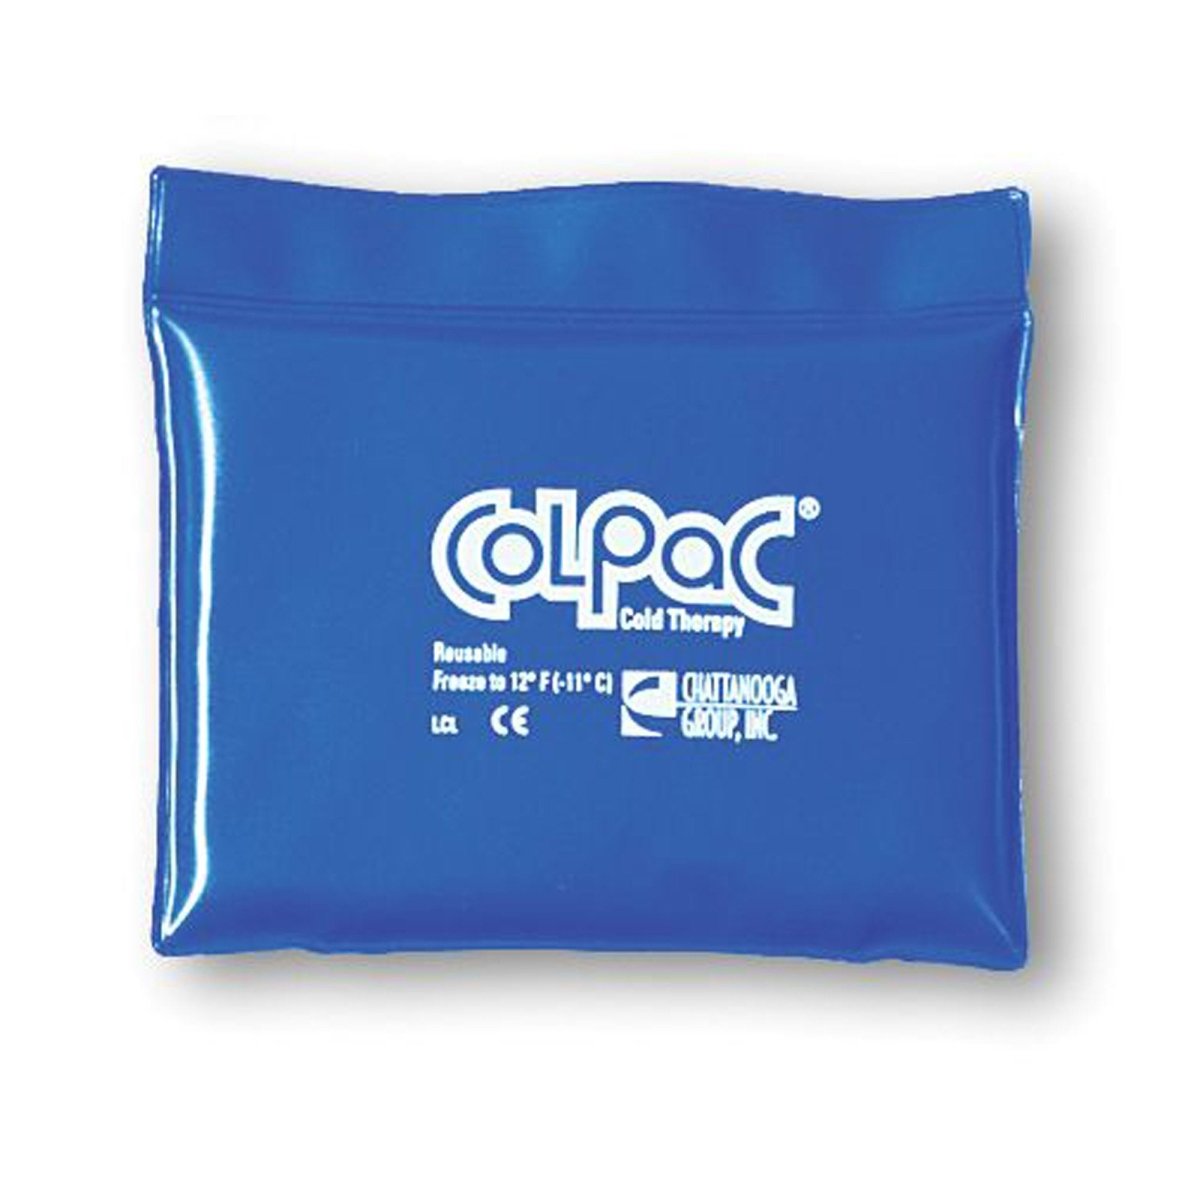 ColPac Cold Therapy, Blue Vinyl, Quarter Size - 174345_EA - 1